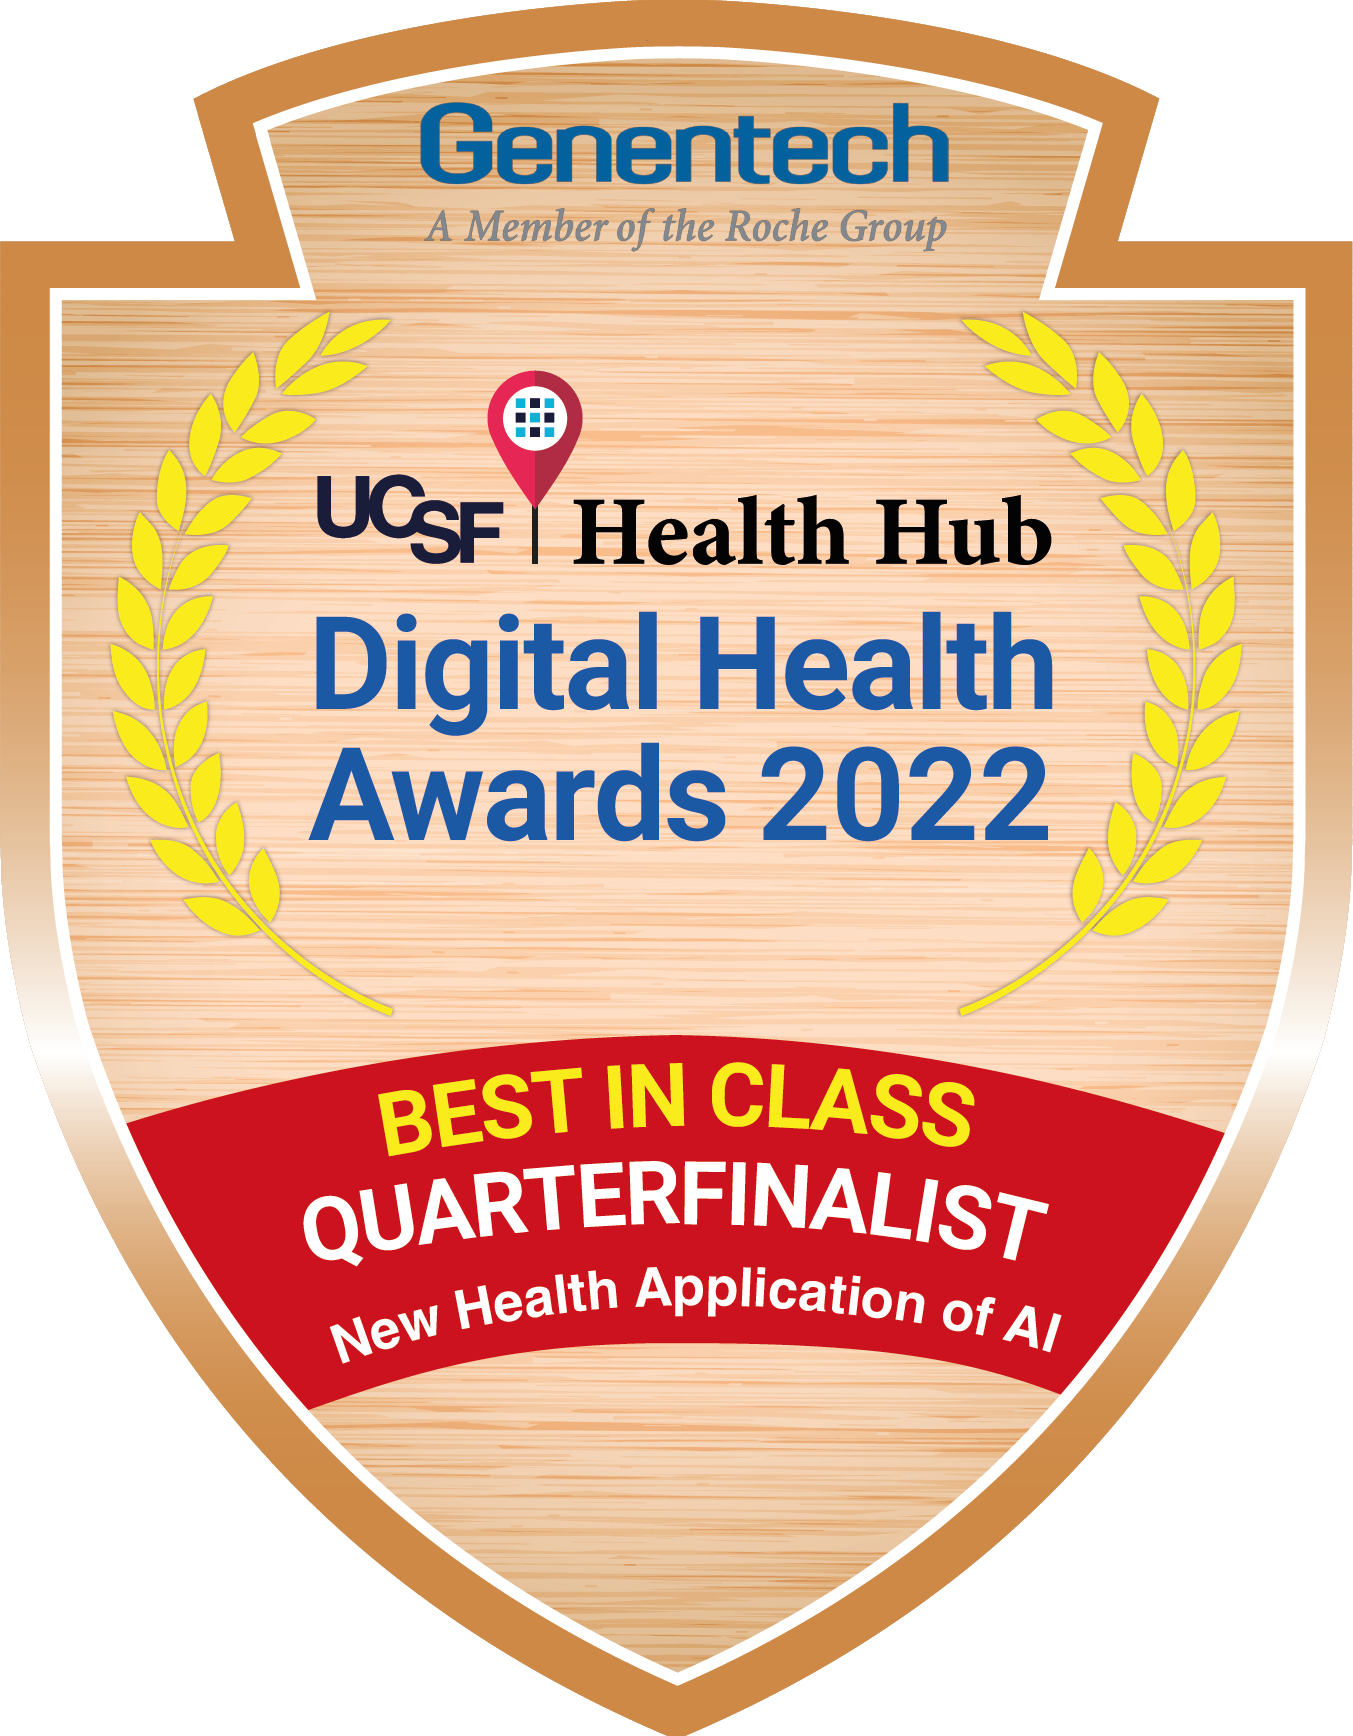 Best in Class - New Health App of AI 2022